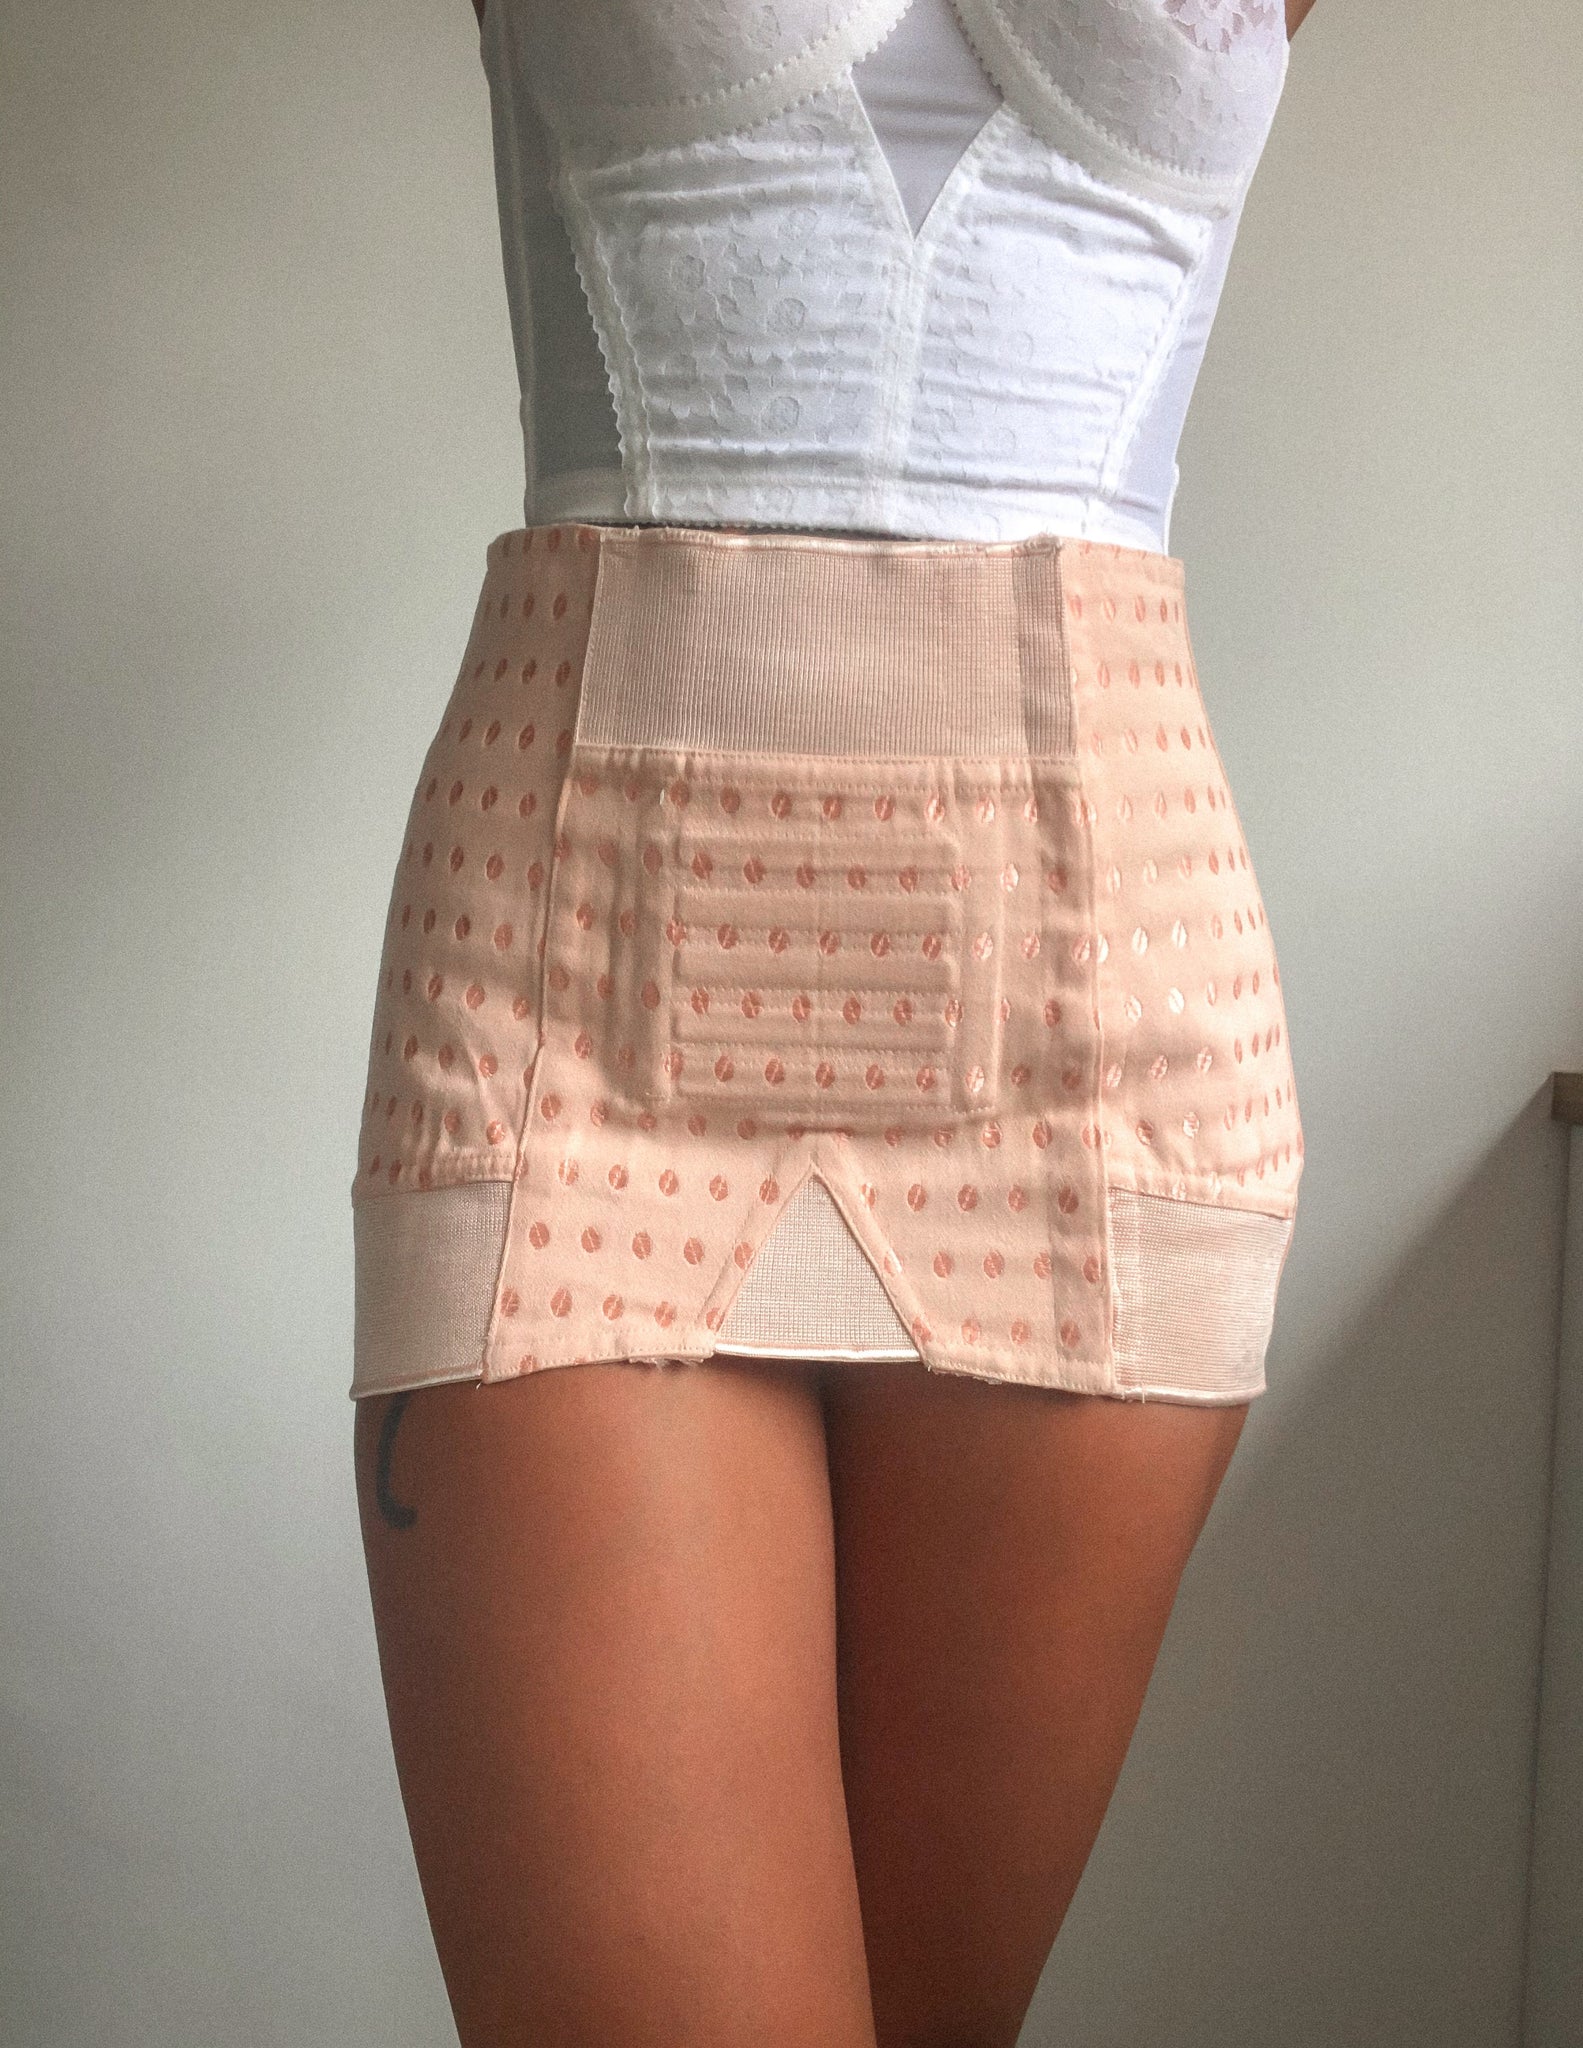 Buy 1950s French Vintage Girdle Online in India 